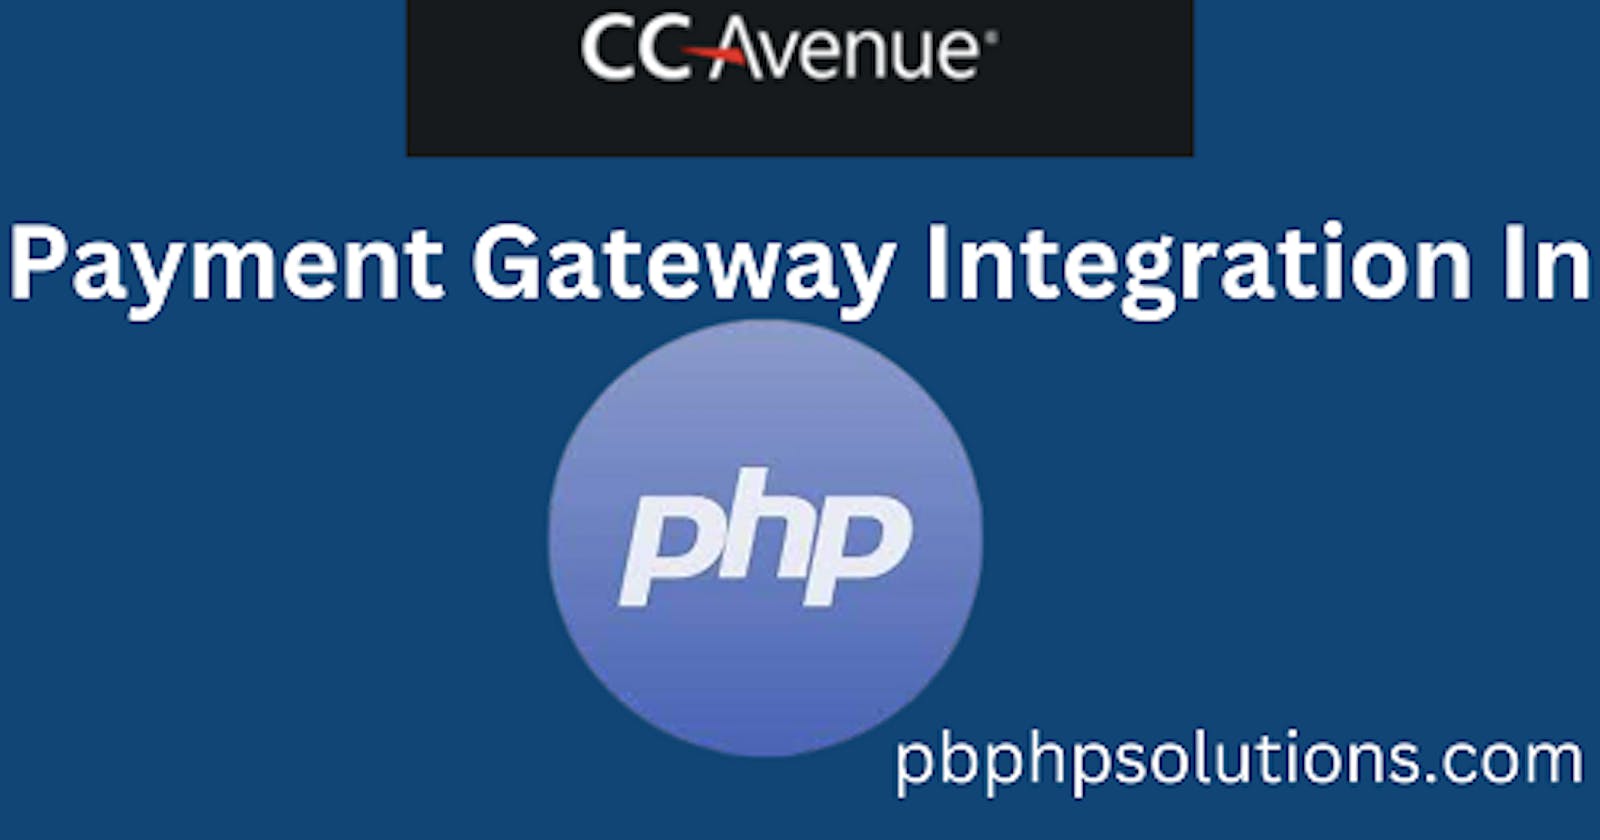 CCAvenue Payment Gateway Integration in PHP